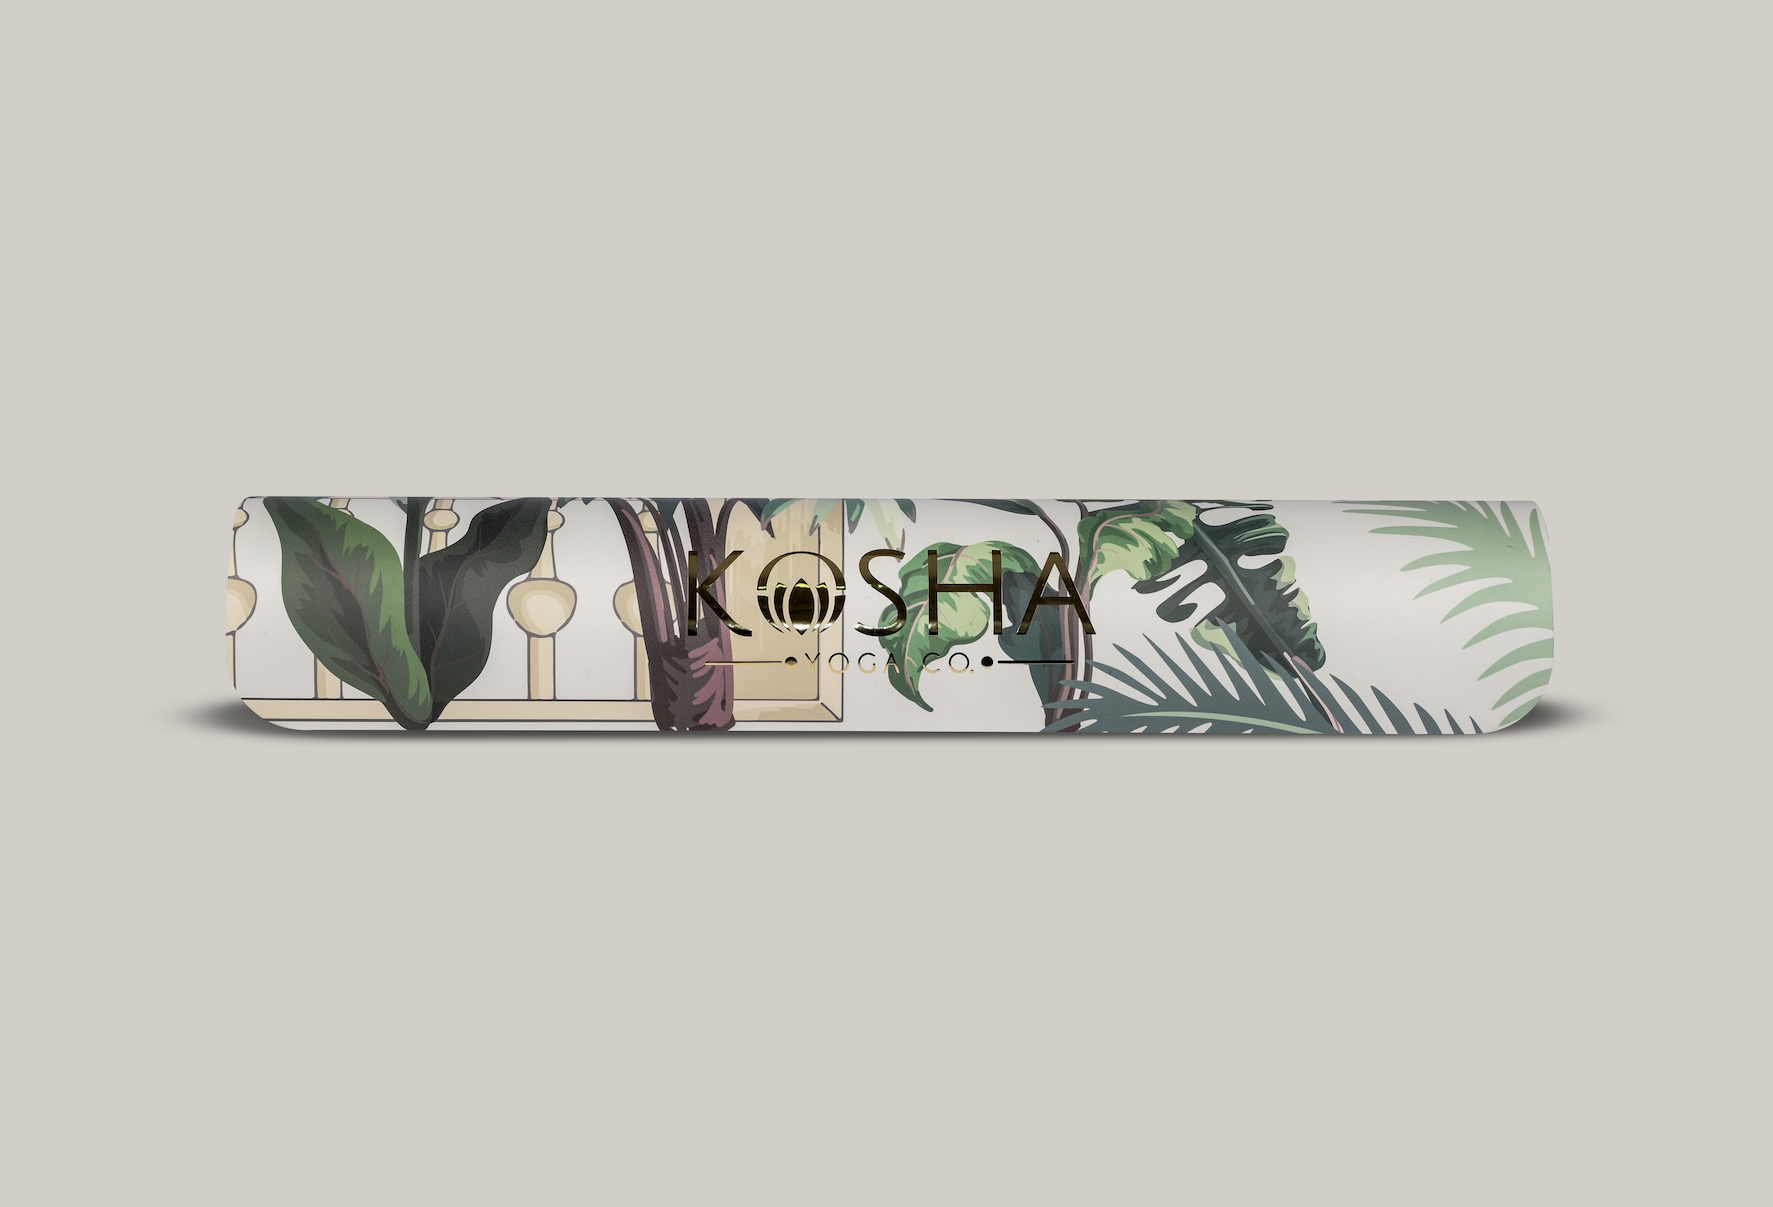 luxury printed yoga mat made from eco friendly natural rubber